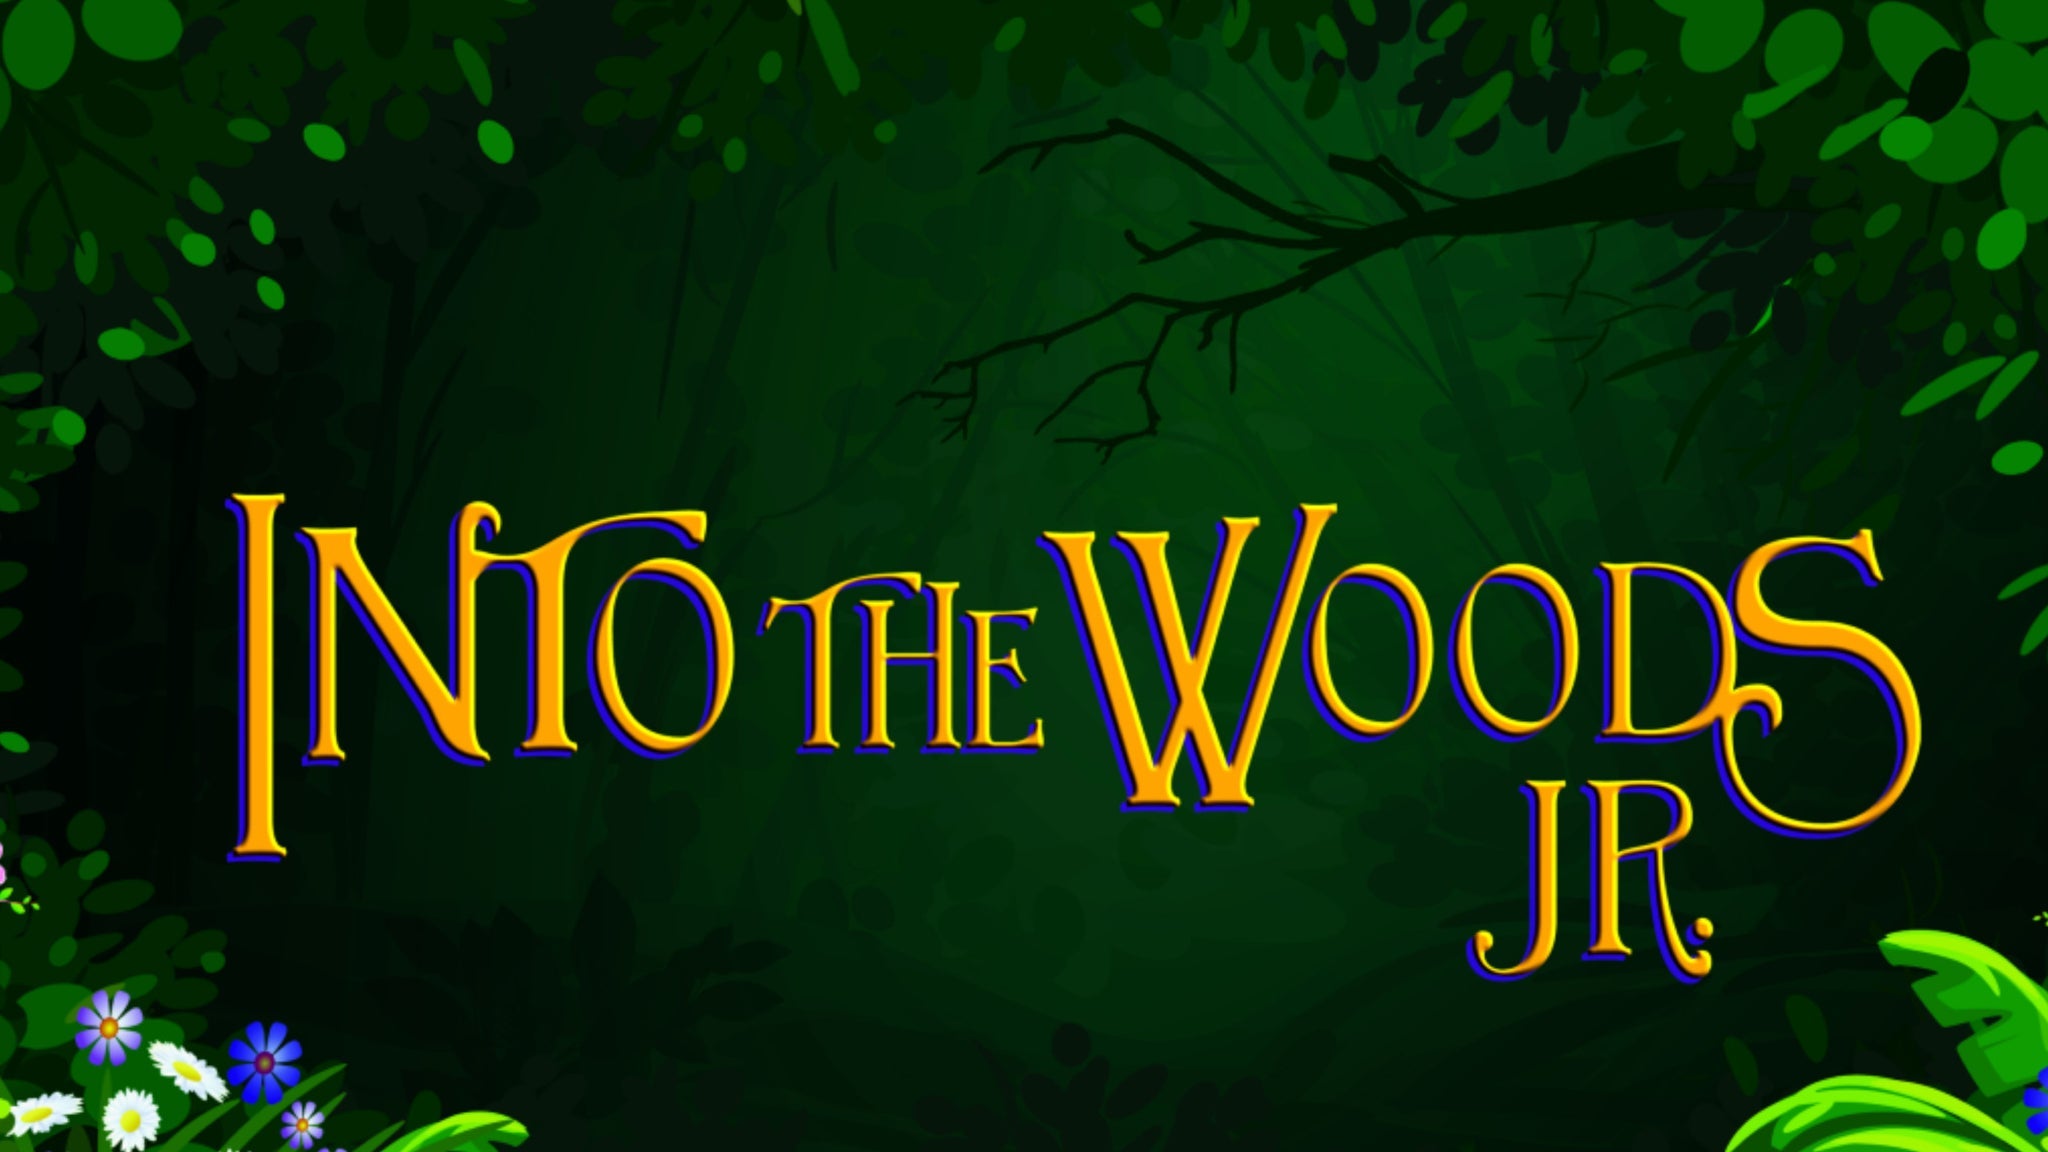 working presale password to Into the Woods, Jr. advanced tickets in Hagerstown